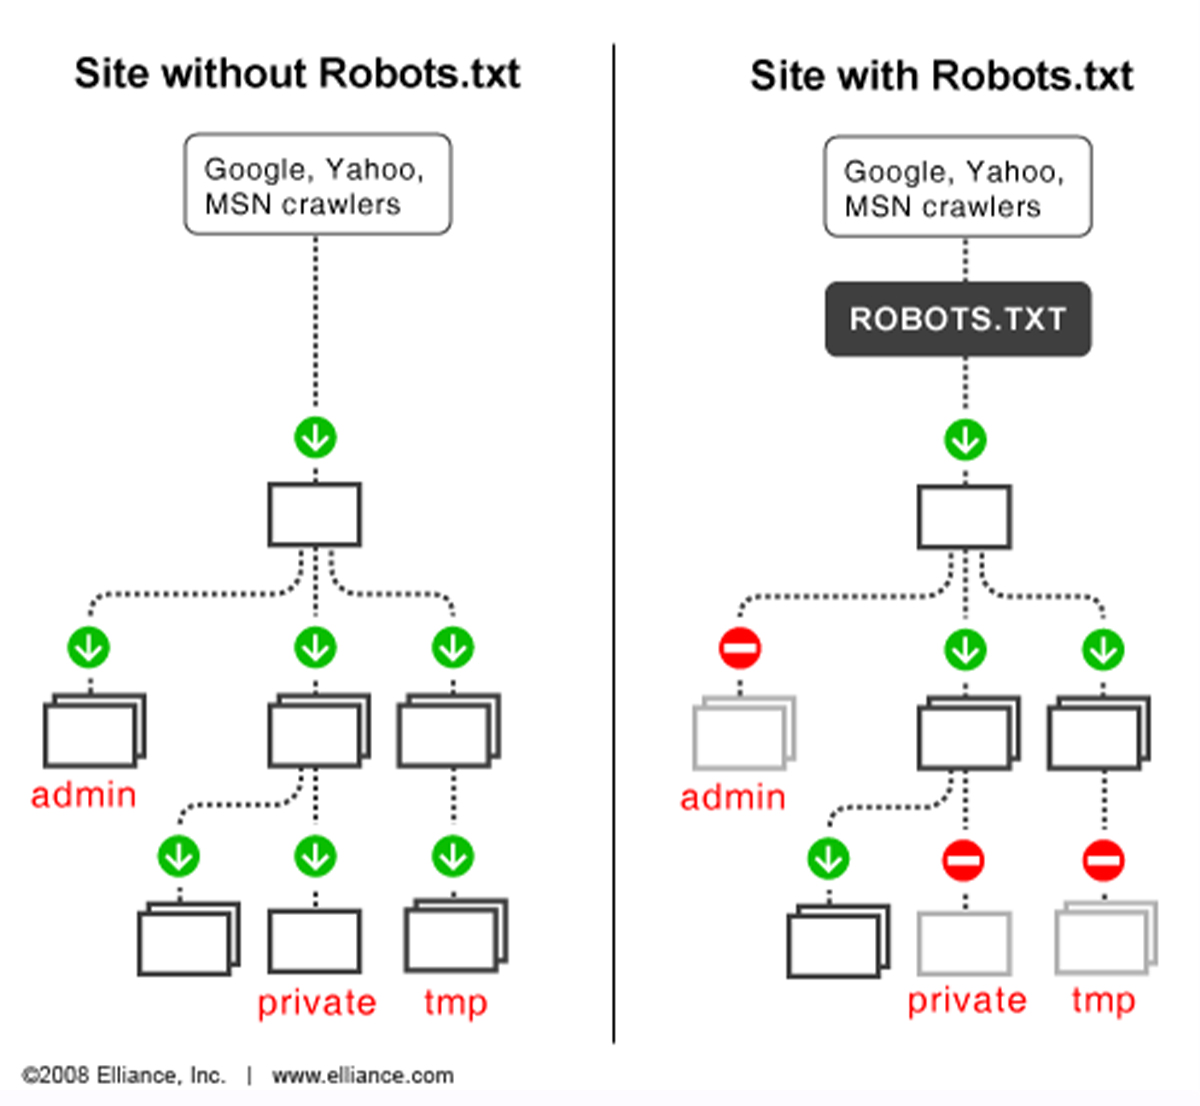 Showing how webistes look with Robots.txt and without Robots.txt